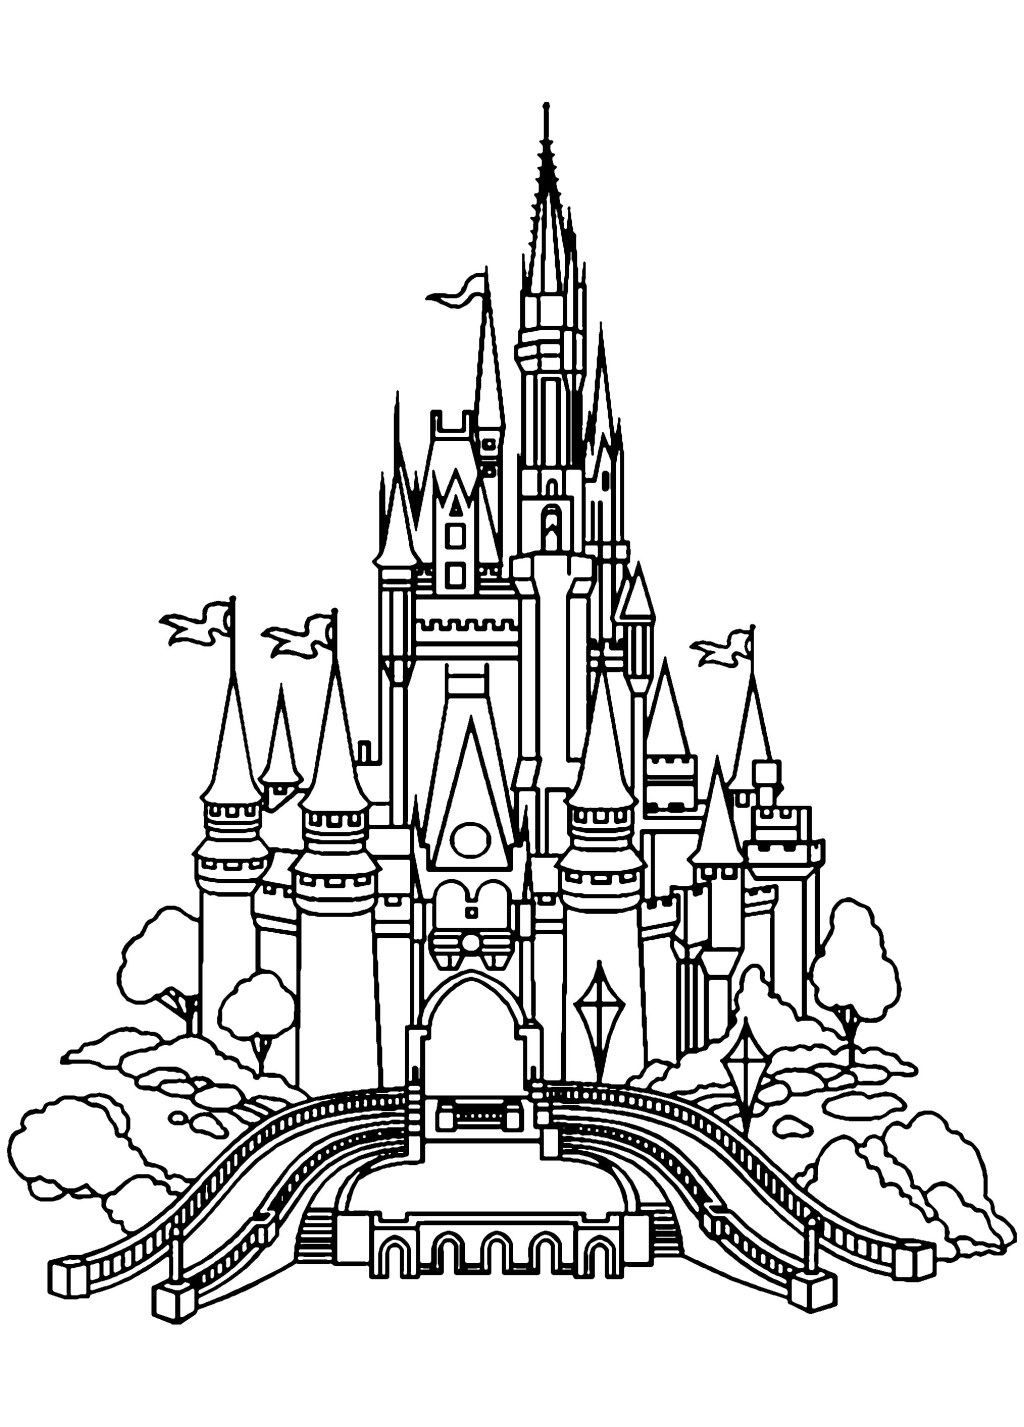 Picture of: Disneyland castle – Return to childhood Adult Coloring Pages